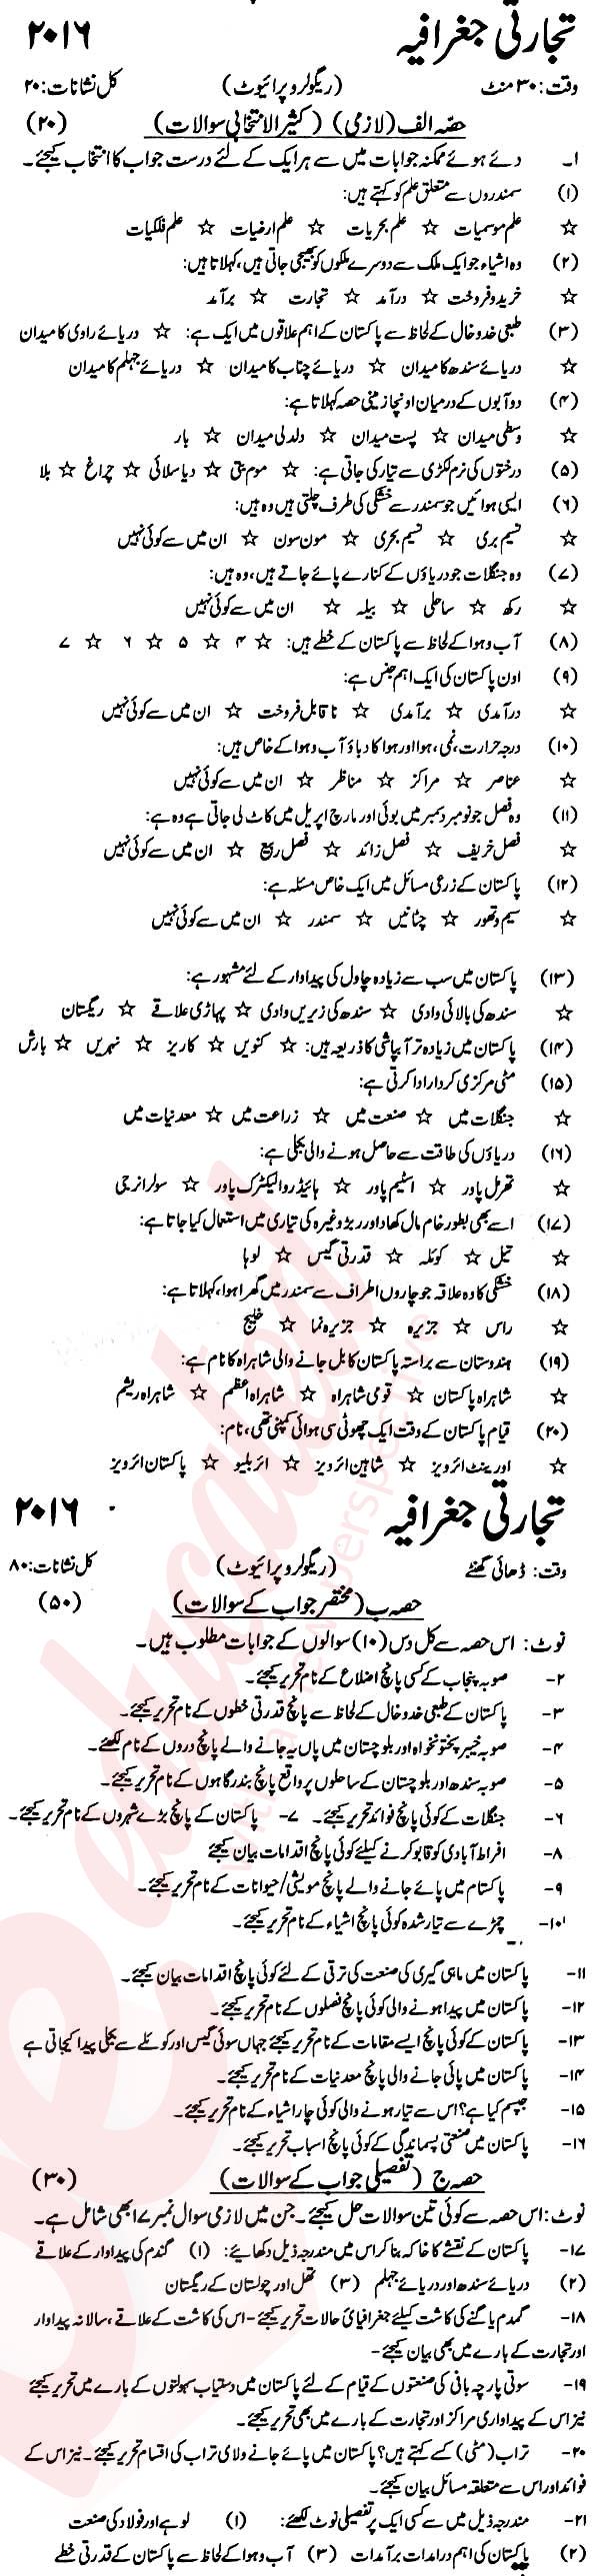 Commercial Geography 10th Urdu Medium Past Paper Group 1 KPBTE 2016